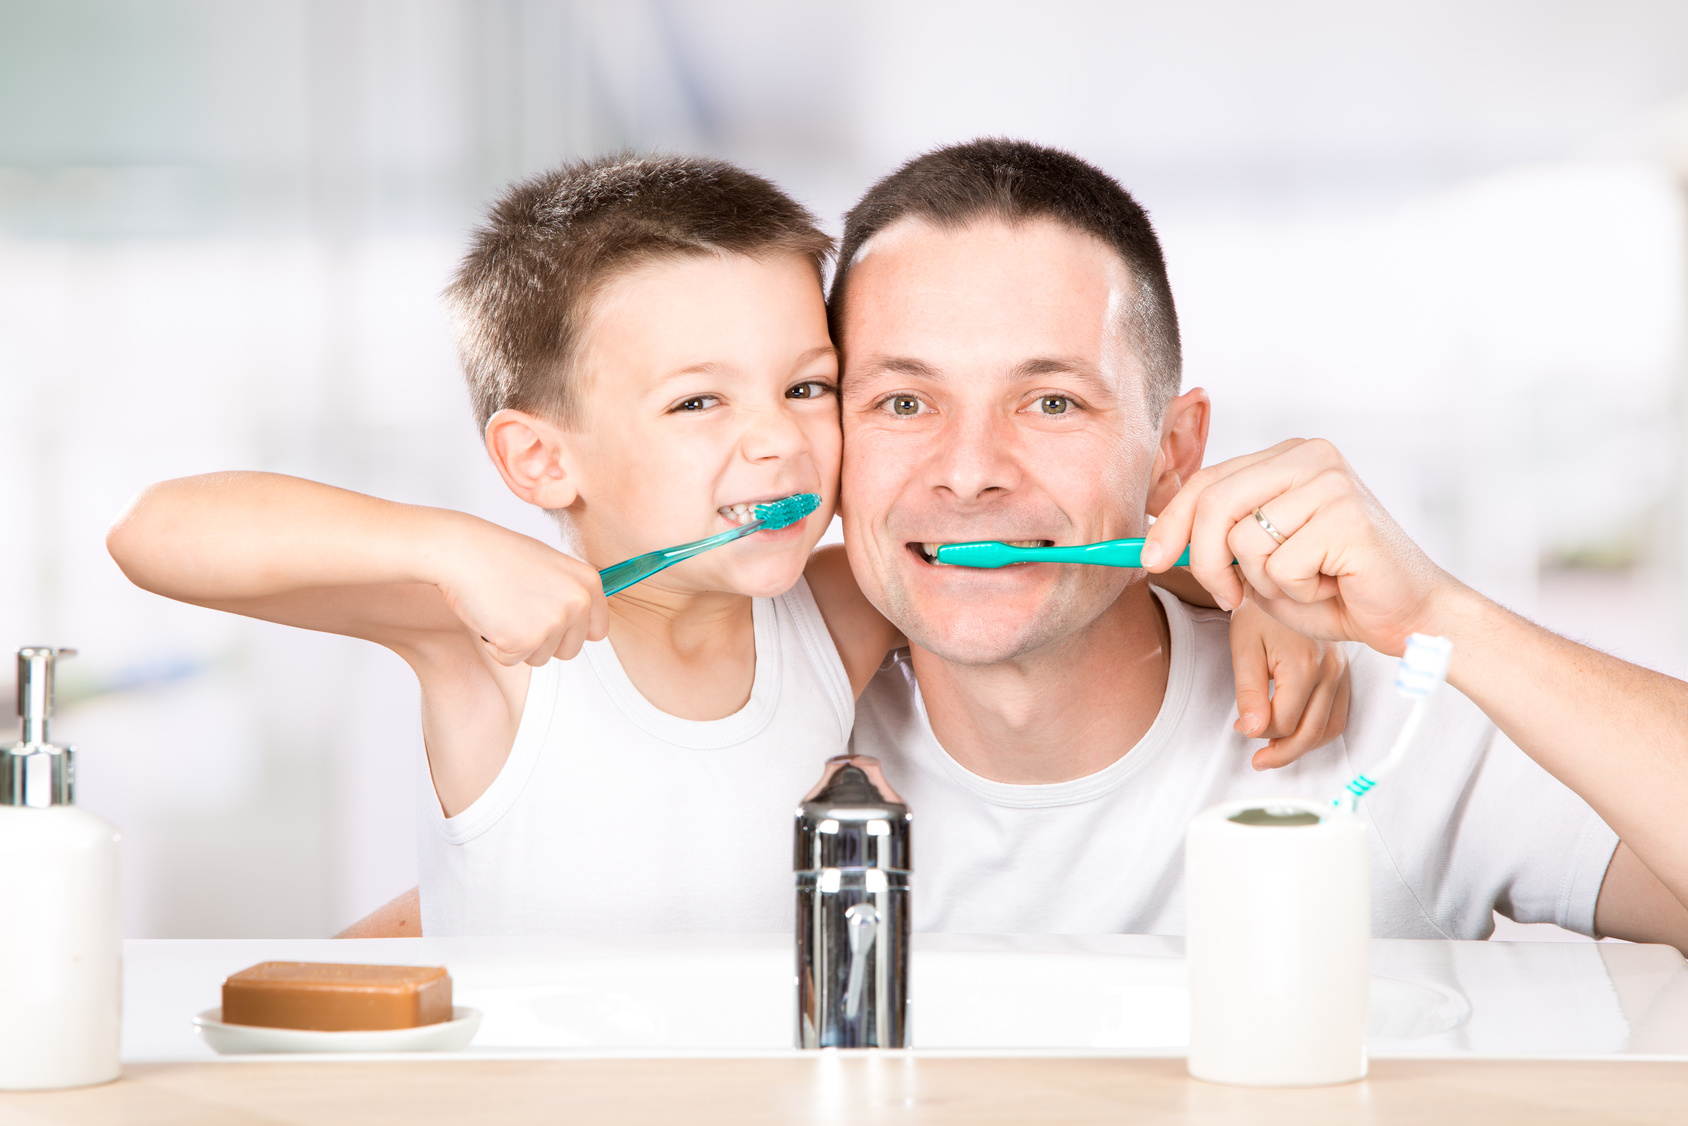 Can genetic testing help prevent dental issues?